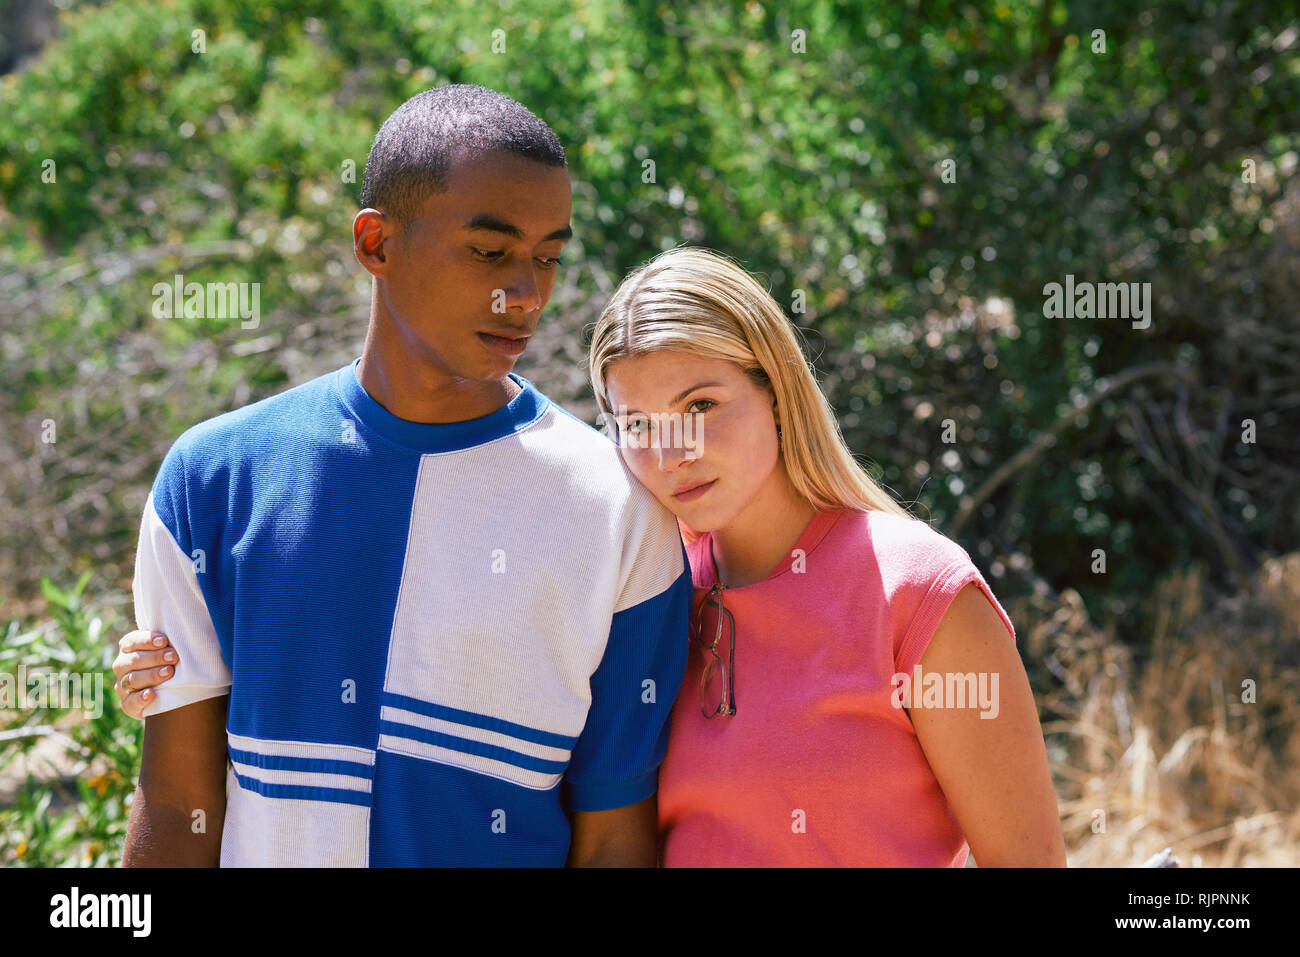 Young couple in park, portrait, Los Angeles, California, USA Stock Photo